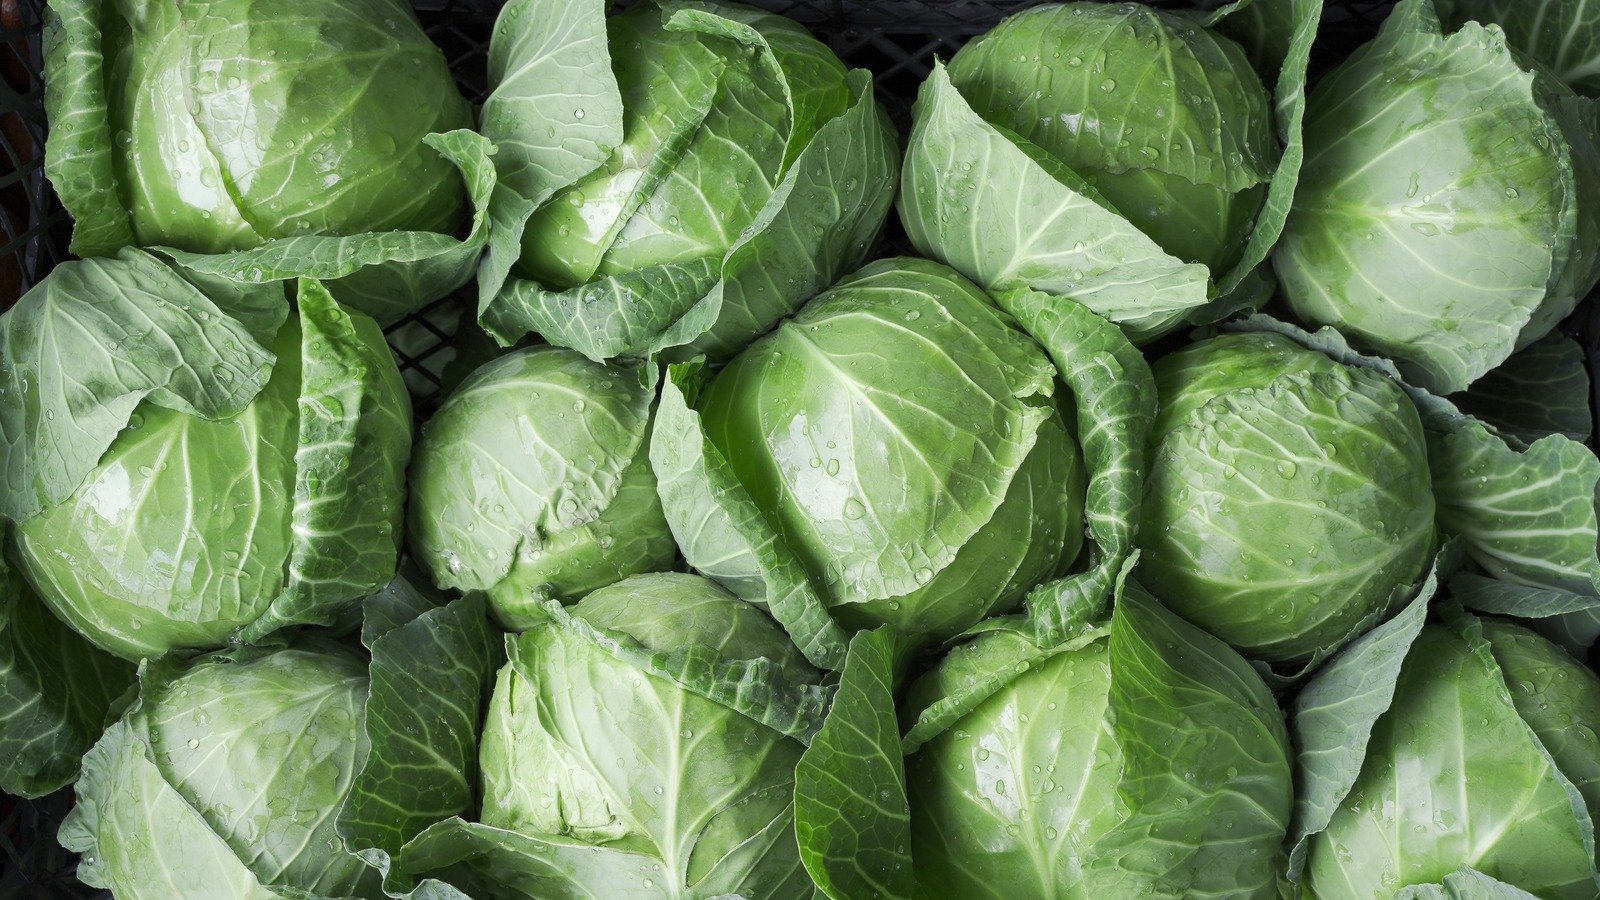 The Ingredient You Need To Add A Nice Kick To Bland Cabbage - The Daily Meal